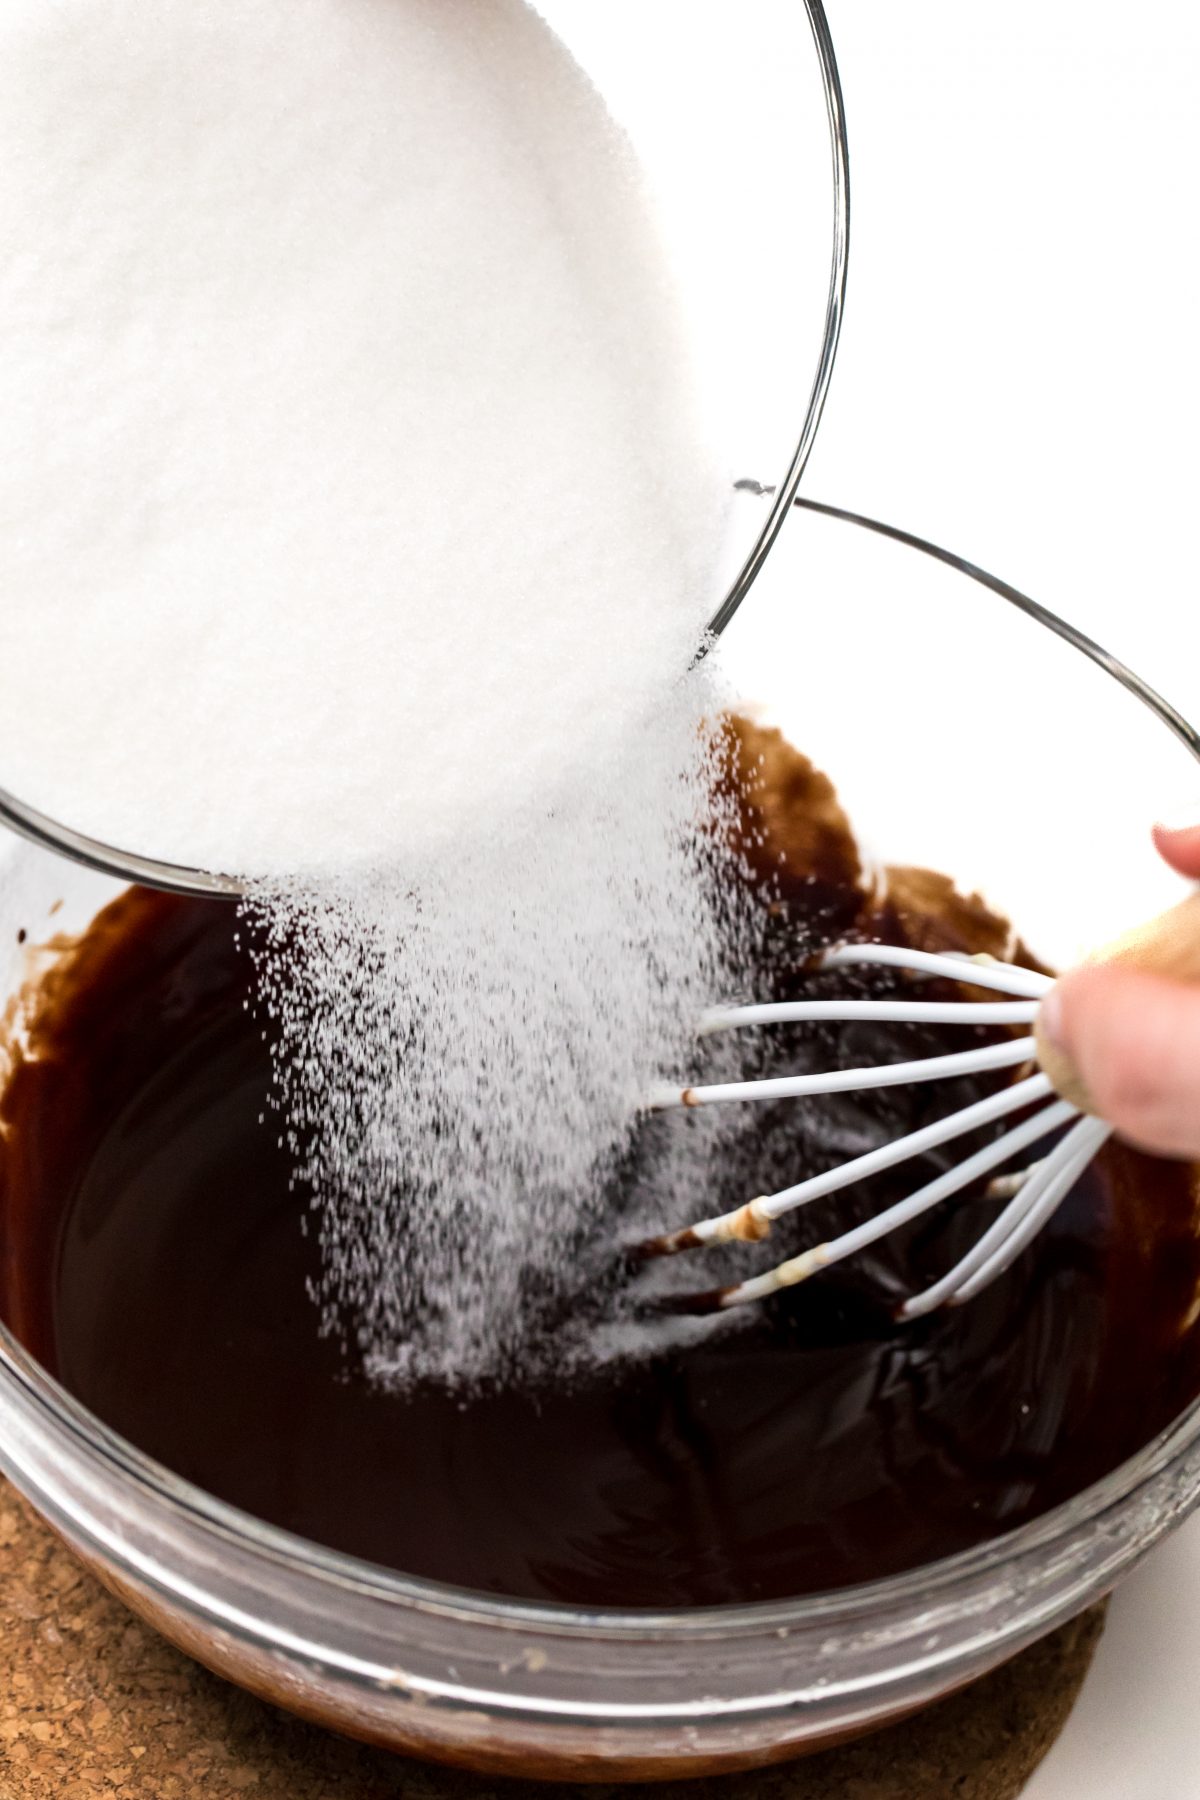 Add sugar to melted chocolate